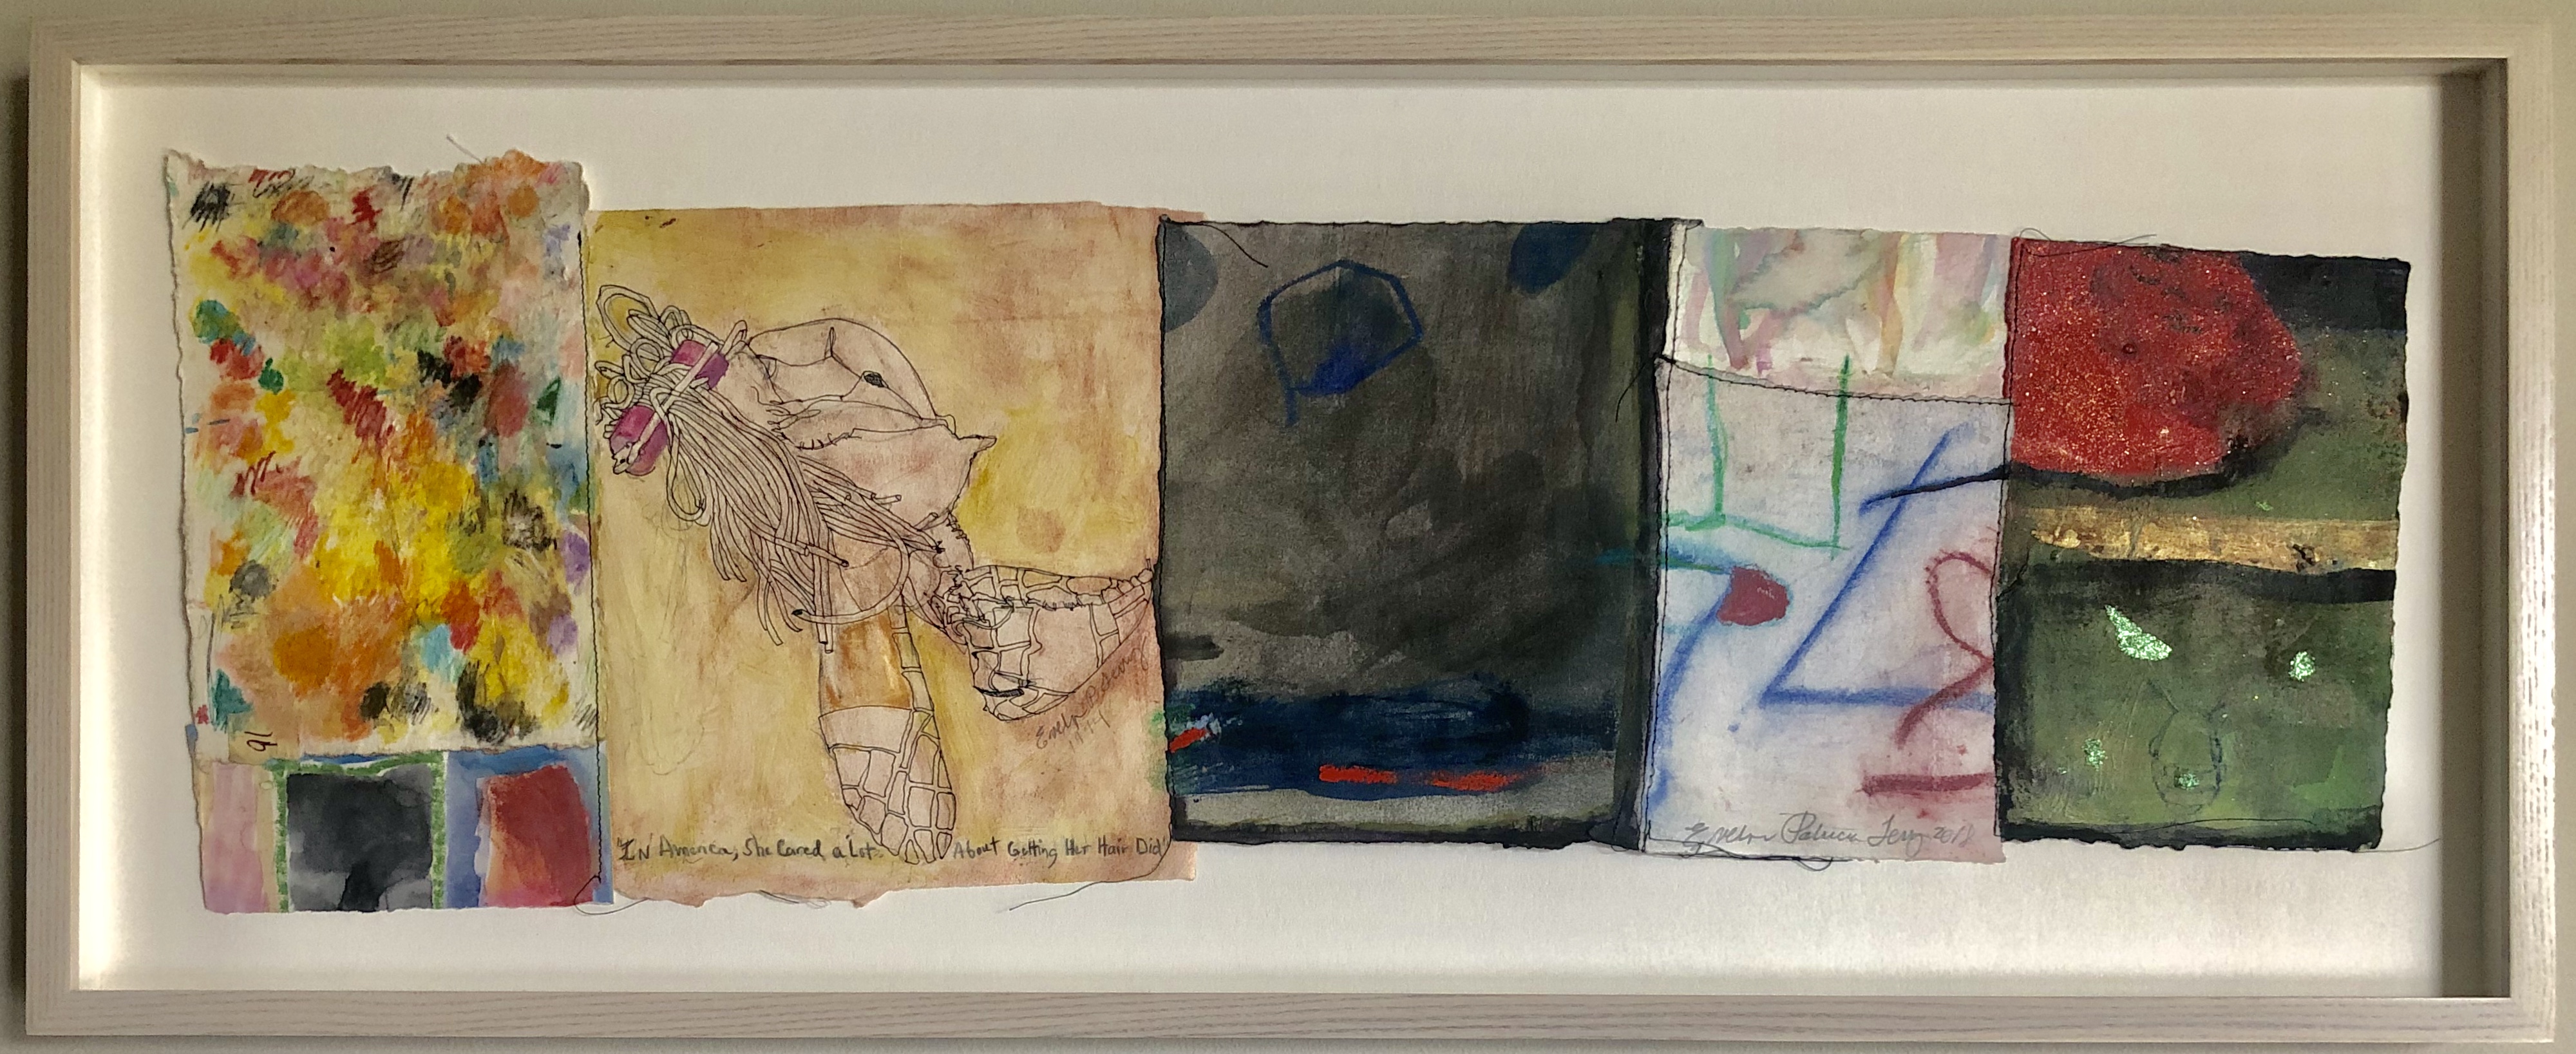 In America, She Cared A Lot About Getting Her Hair Did, 2018 Pastel, ink, thread, watercolor on rag paper, 10 ¾ x 31 inches (framed)
